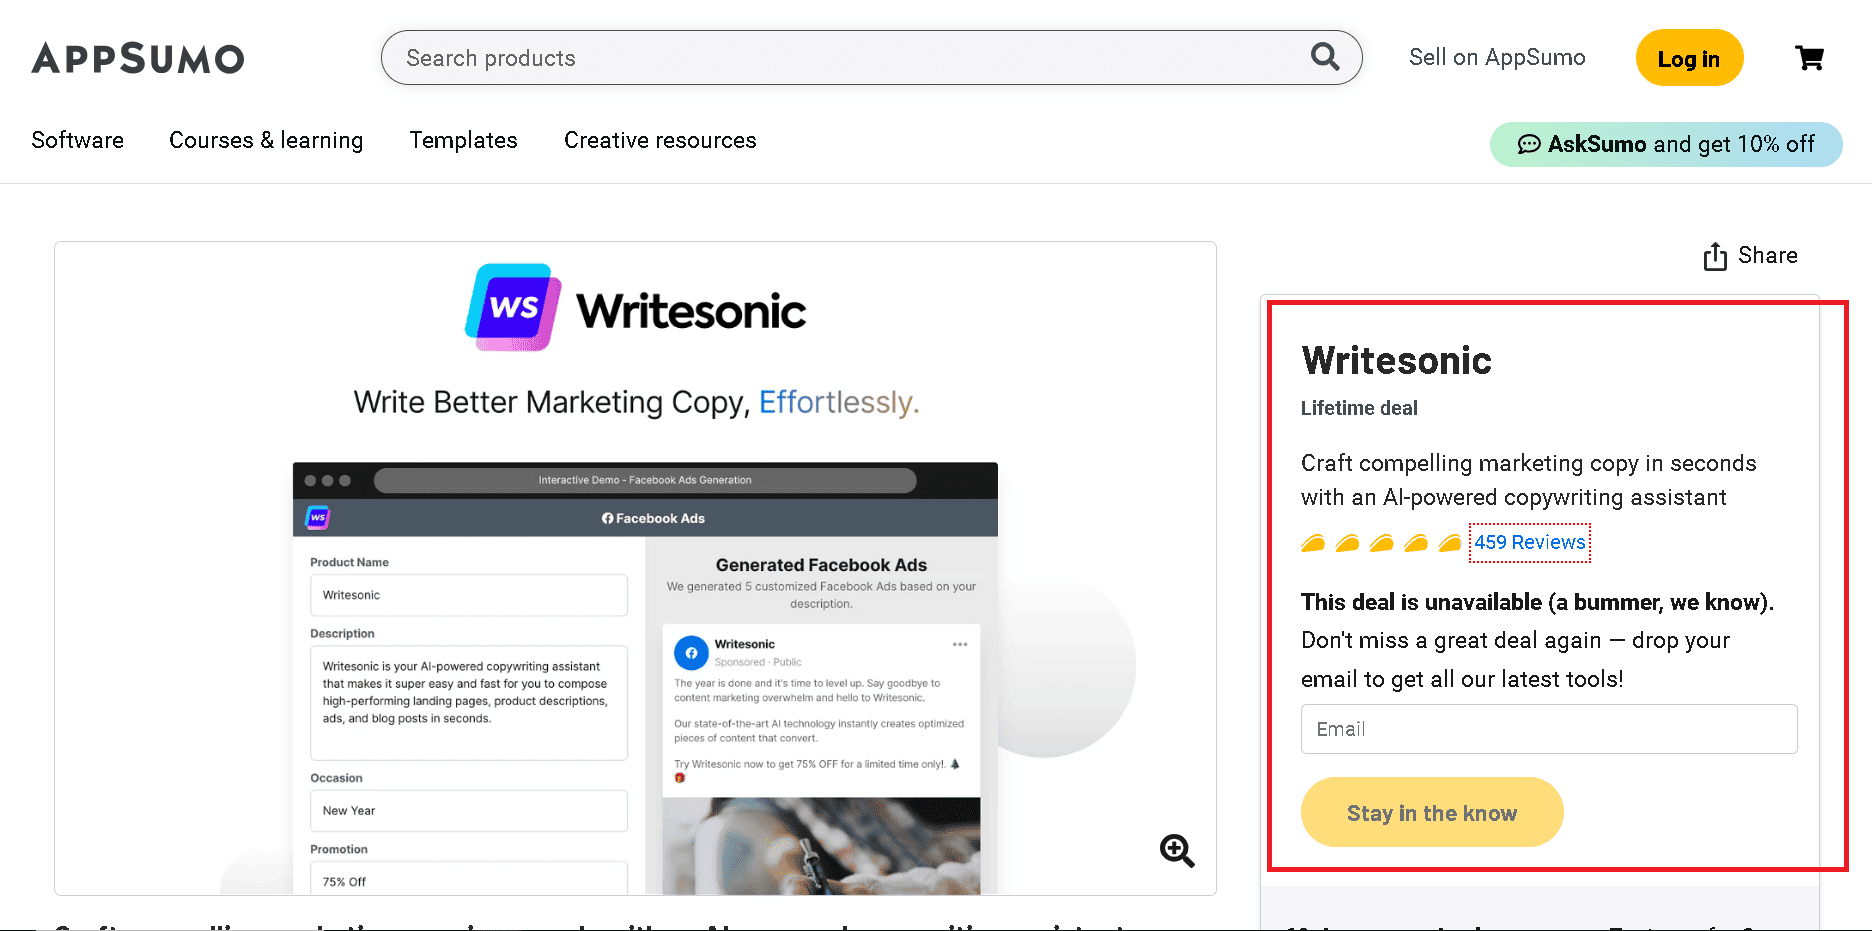 Writesonic AppSumo deal doesn't exist